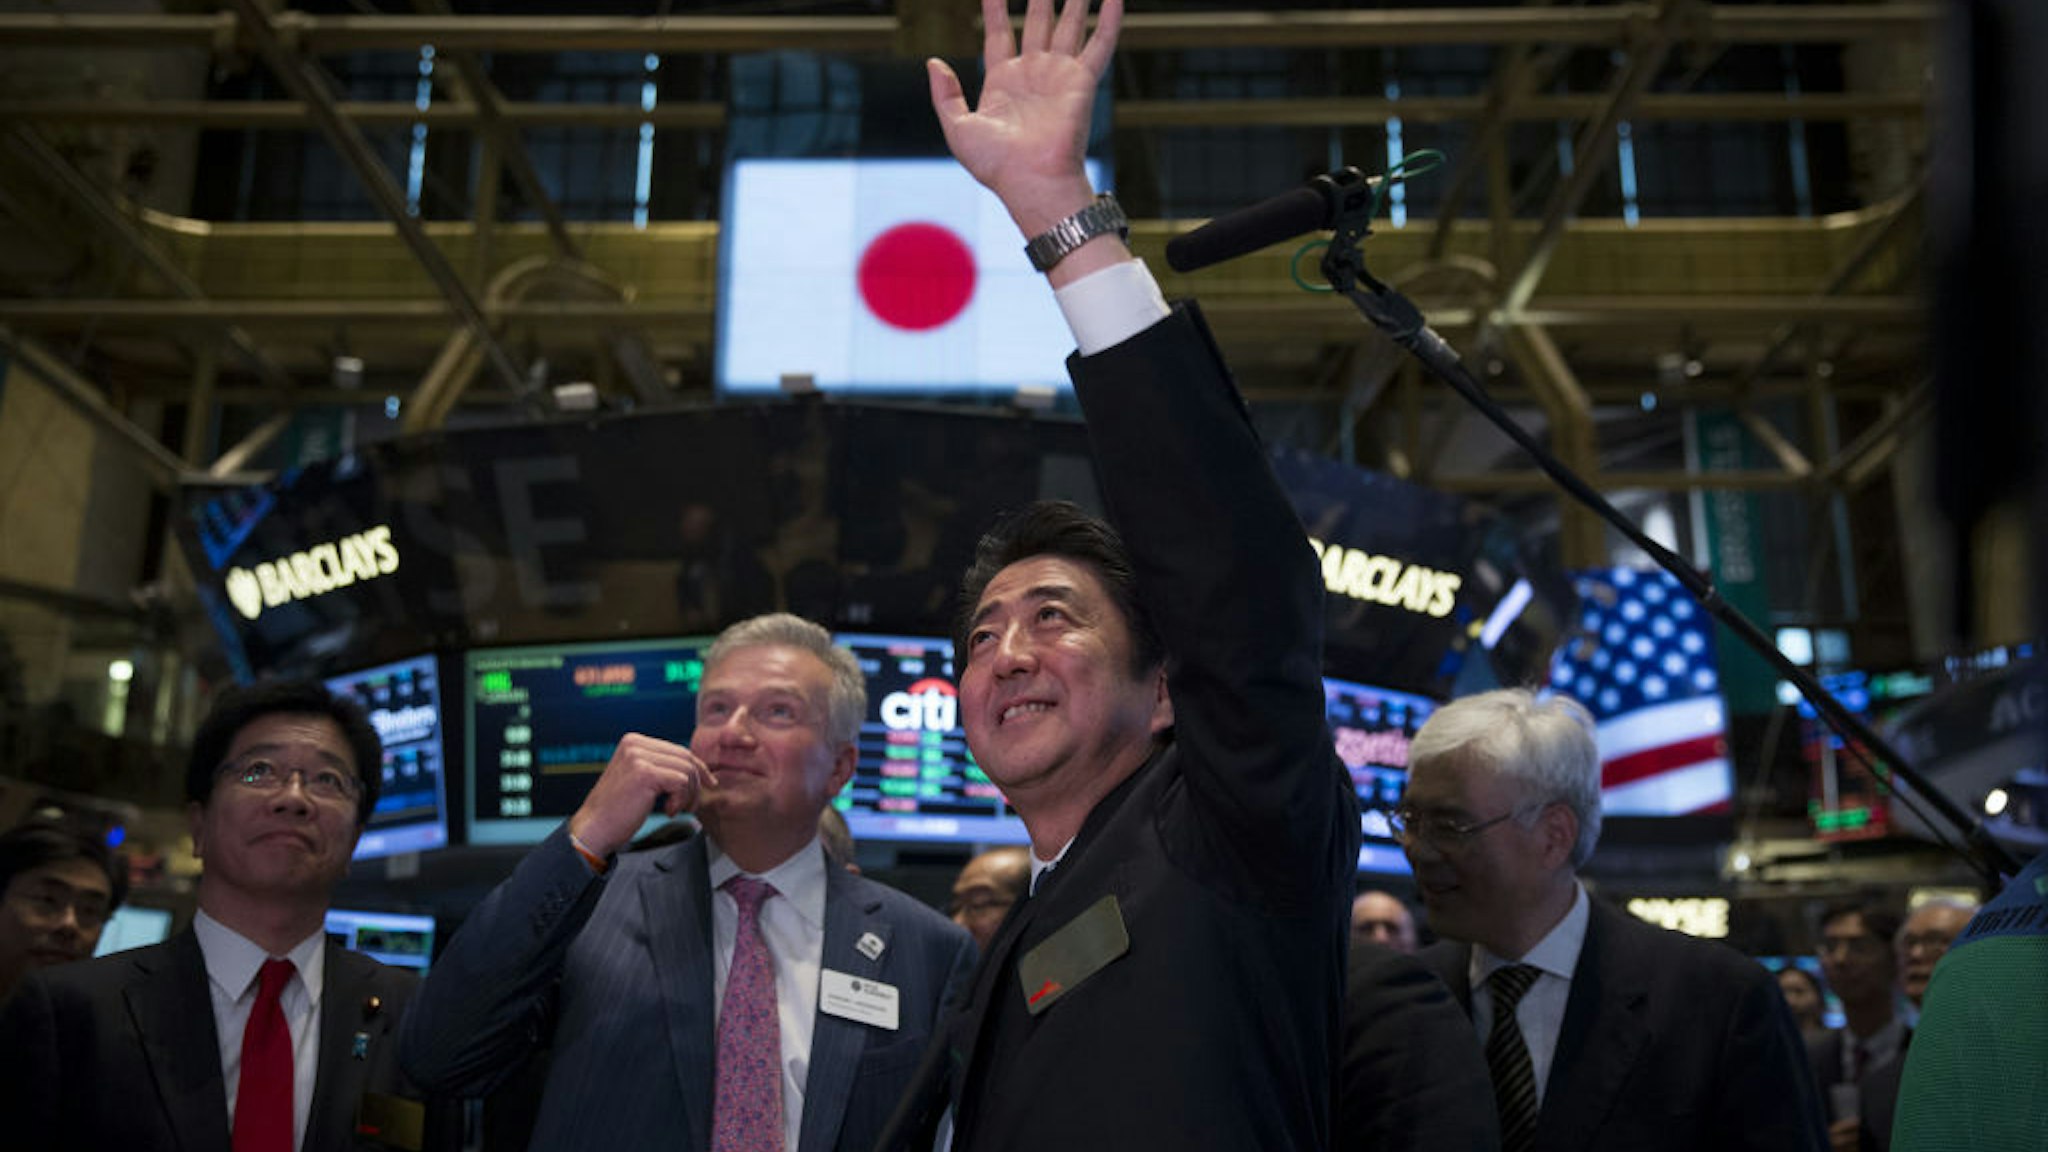 FILE: Shinzo Abe, Japan's prime minister, visits the trading floor at the New York Stock Exchange (NYSE) in New York, U.S., on Wednesday, Sept. 25, 2013. Abe Japan's longest-serving premier and a figure of enduring influence -- died after being shot at a campaign event on Friday. July 8, 2022, in an attack that shocked a nation where political violence and guns are rare.